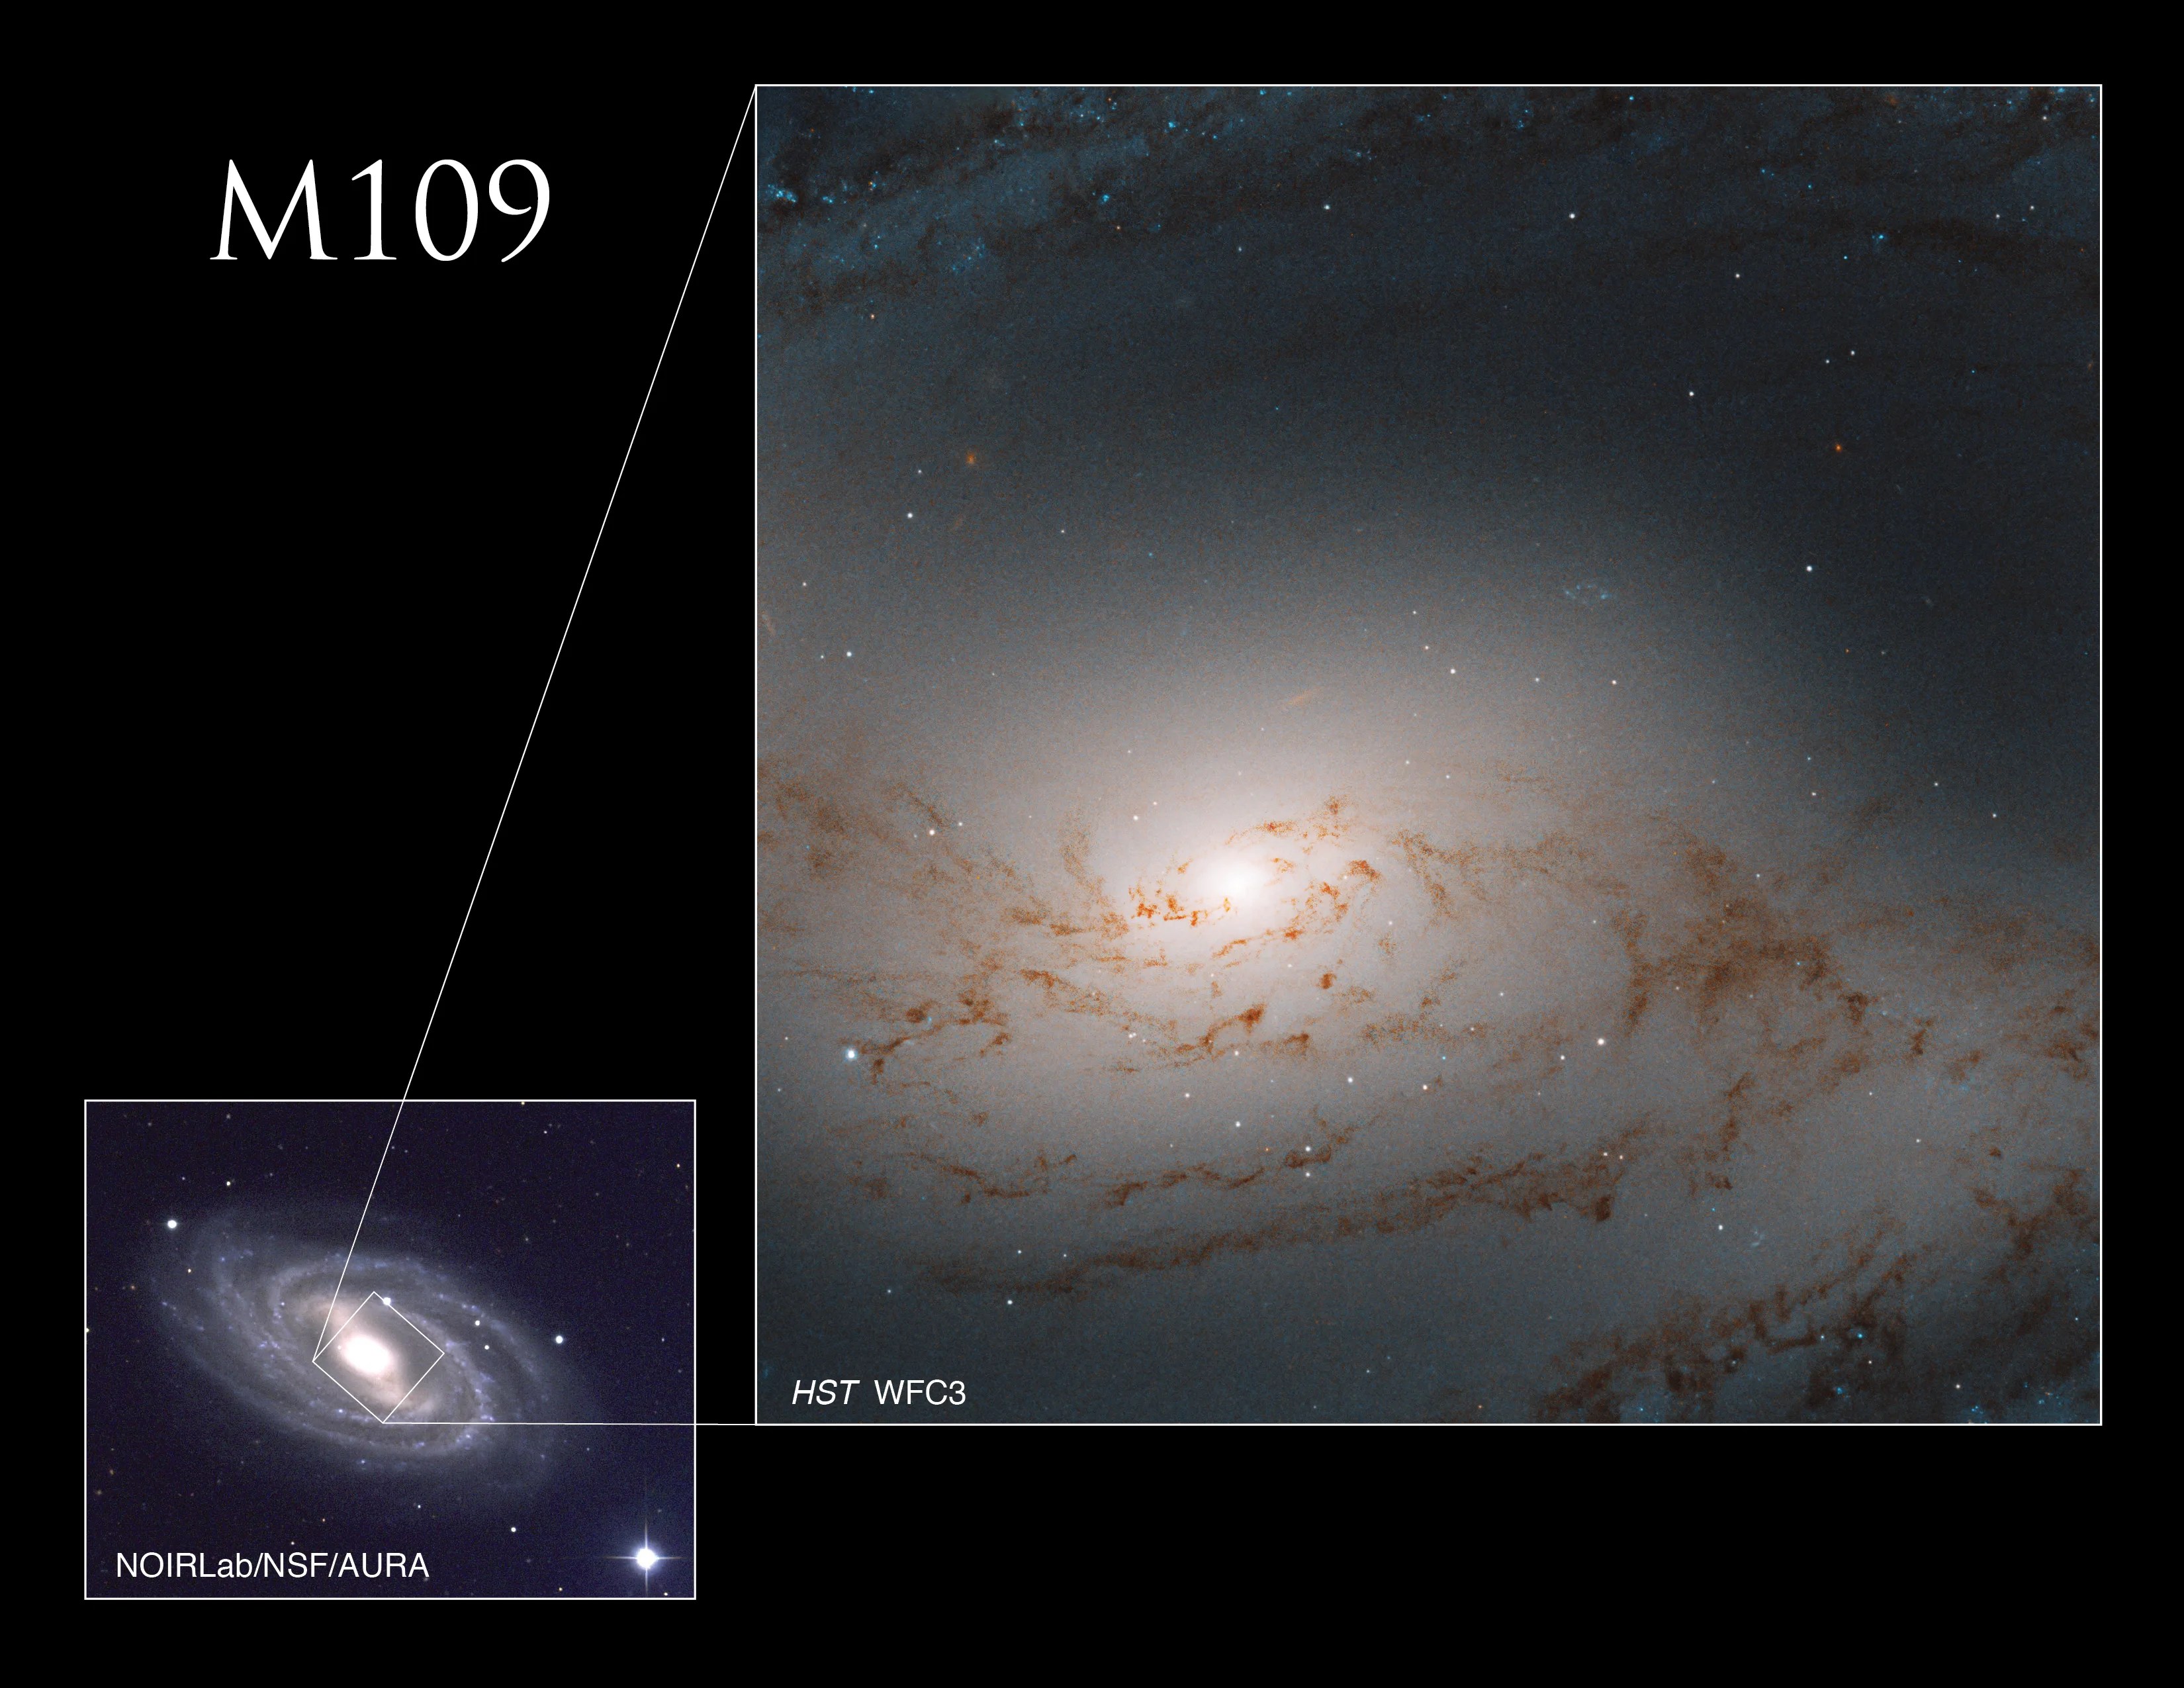 Lower left: small image of a barred spiral galaxy. Upper left two-thirds of image: Haze of light. Bright core of the galaxy just left of center. A smattering of rusty-brown dust clouds in the foreground.